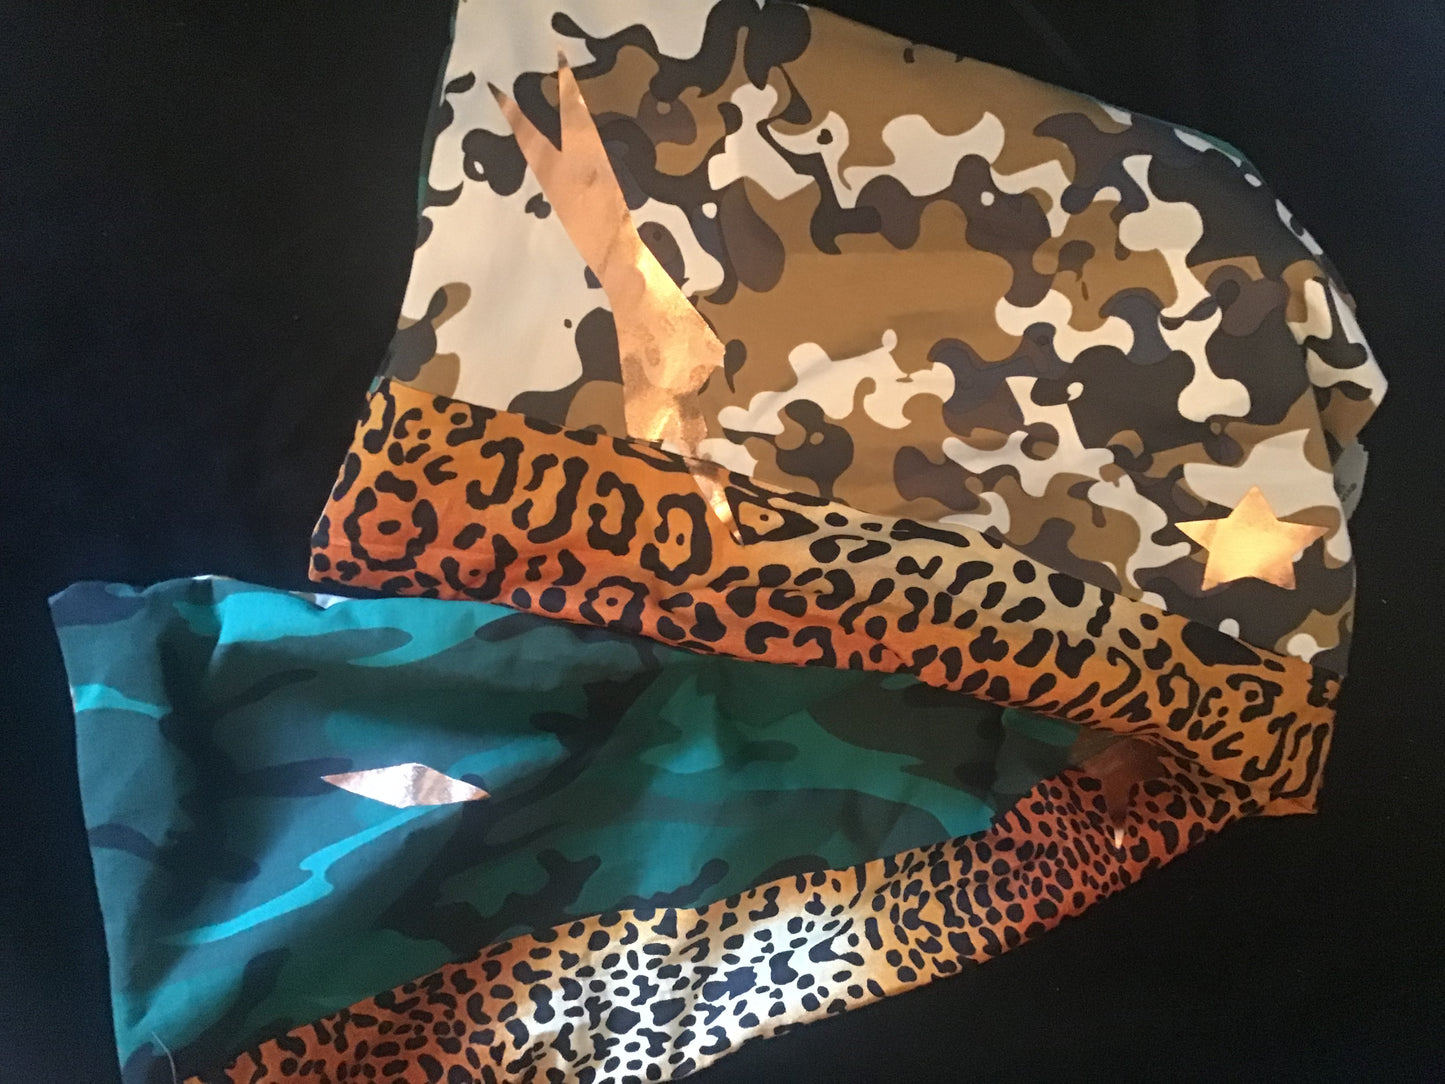 Twisturban in two camos and leopard